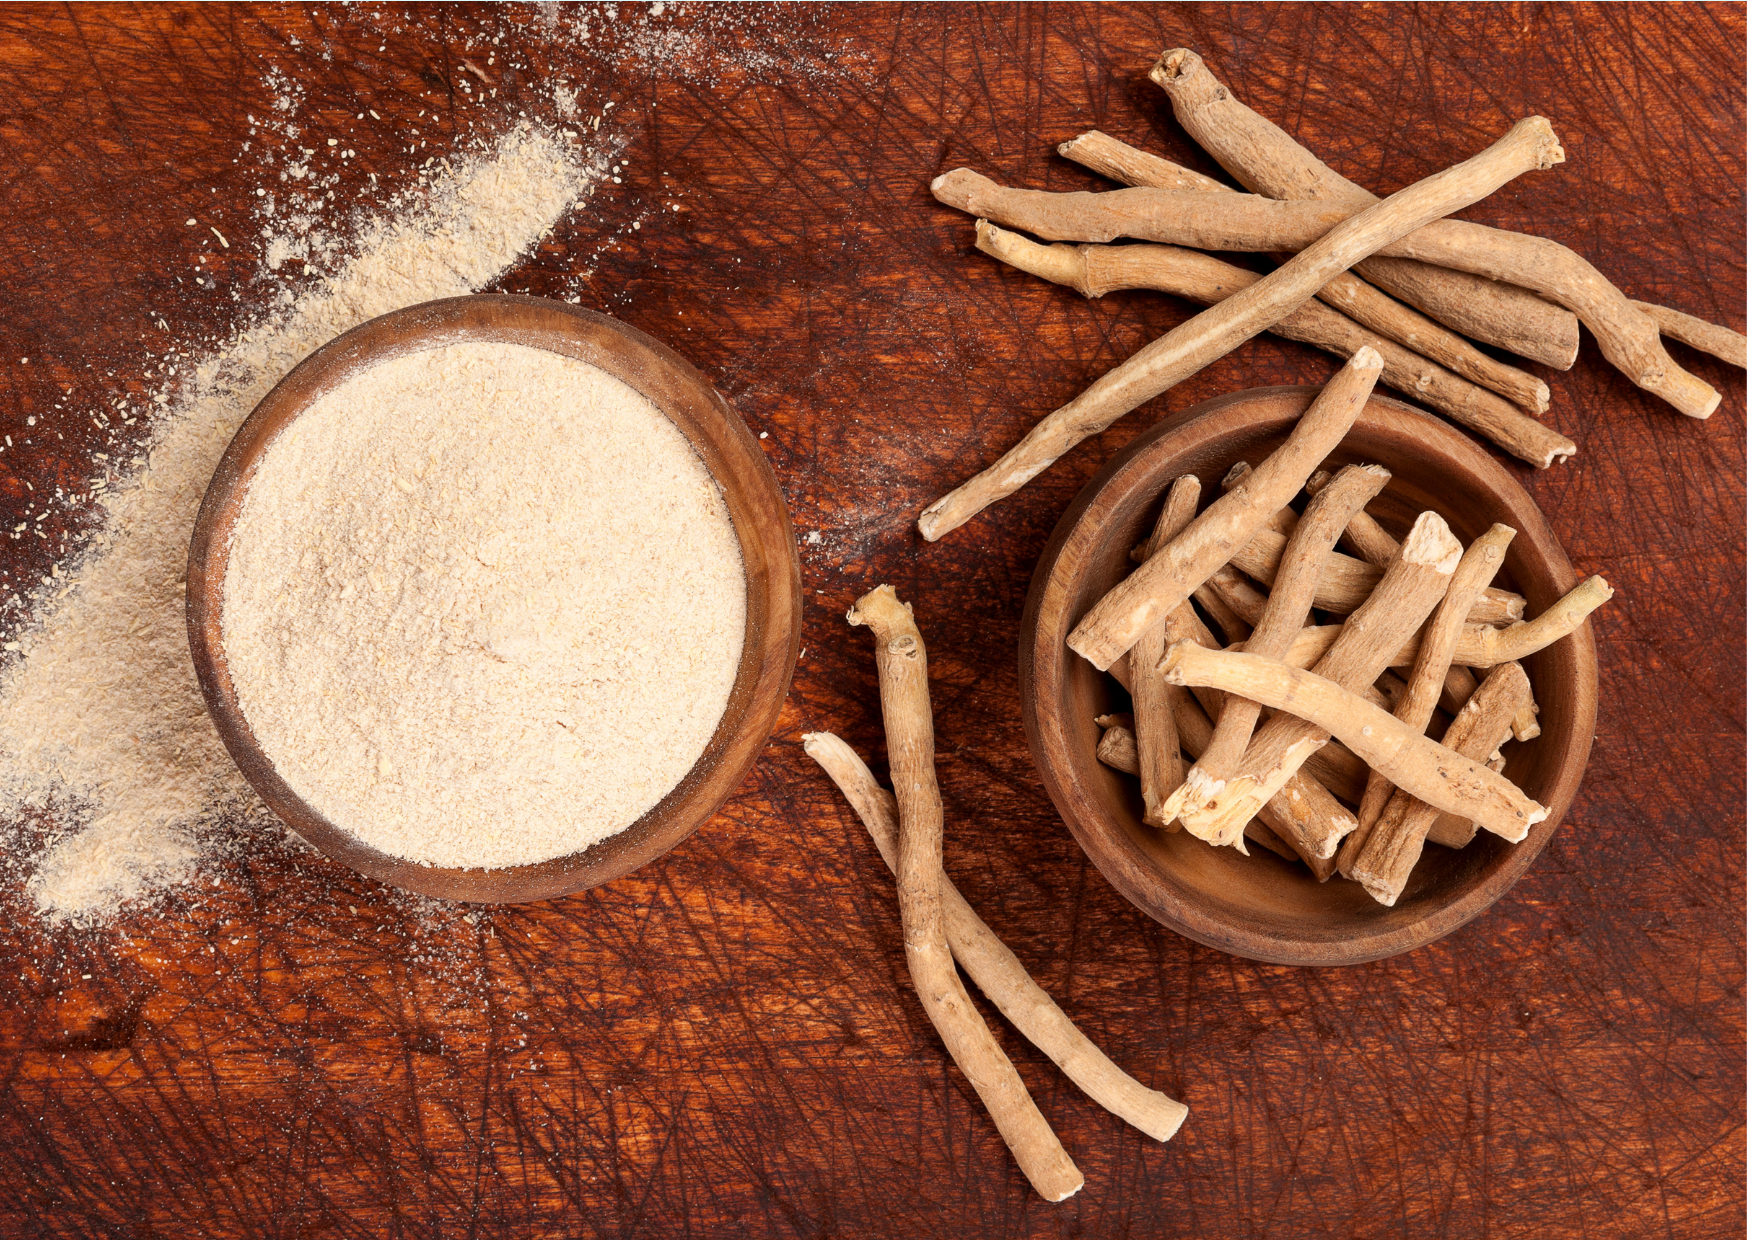 Ashwagandha can assist with many health problems including stress.